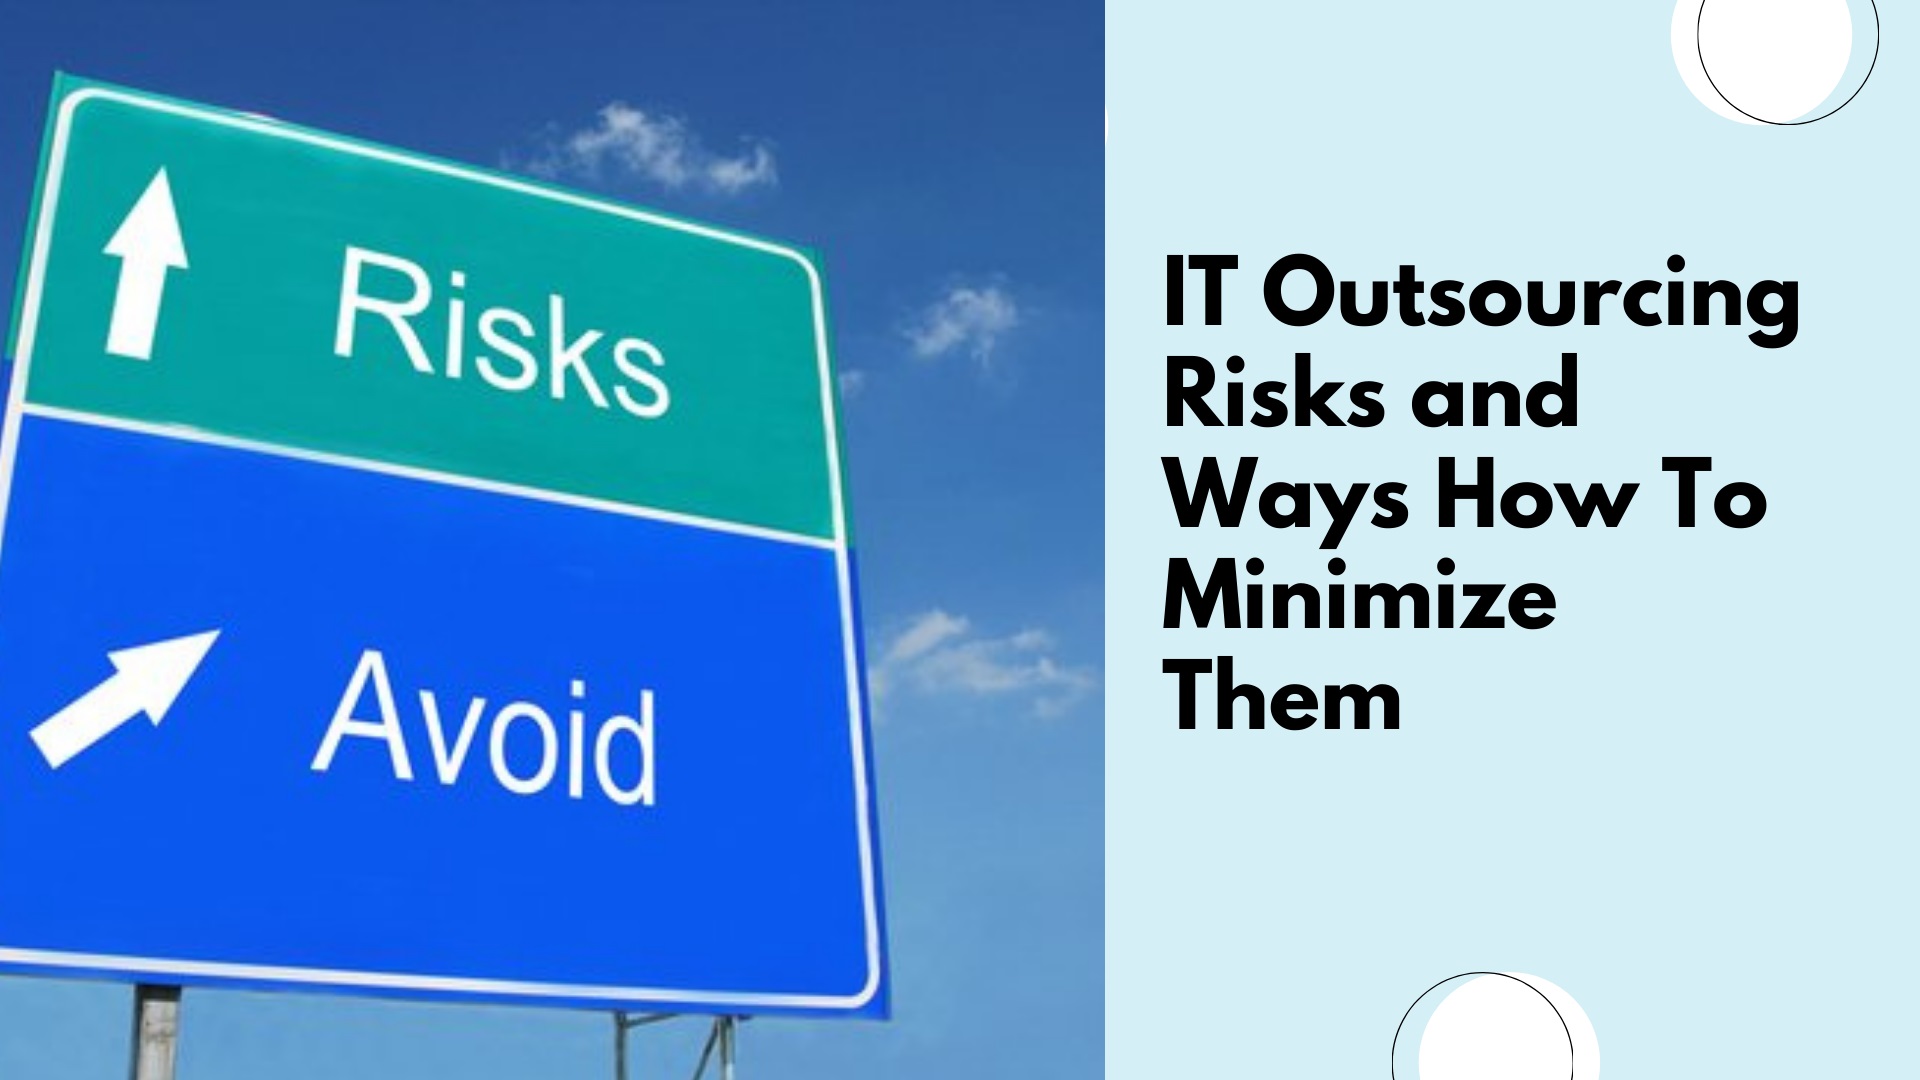 IT Outsourcing Risks and Ways How To Minimize Them